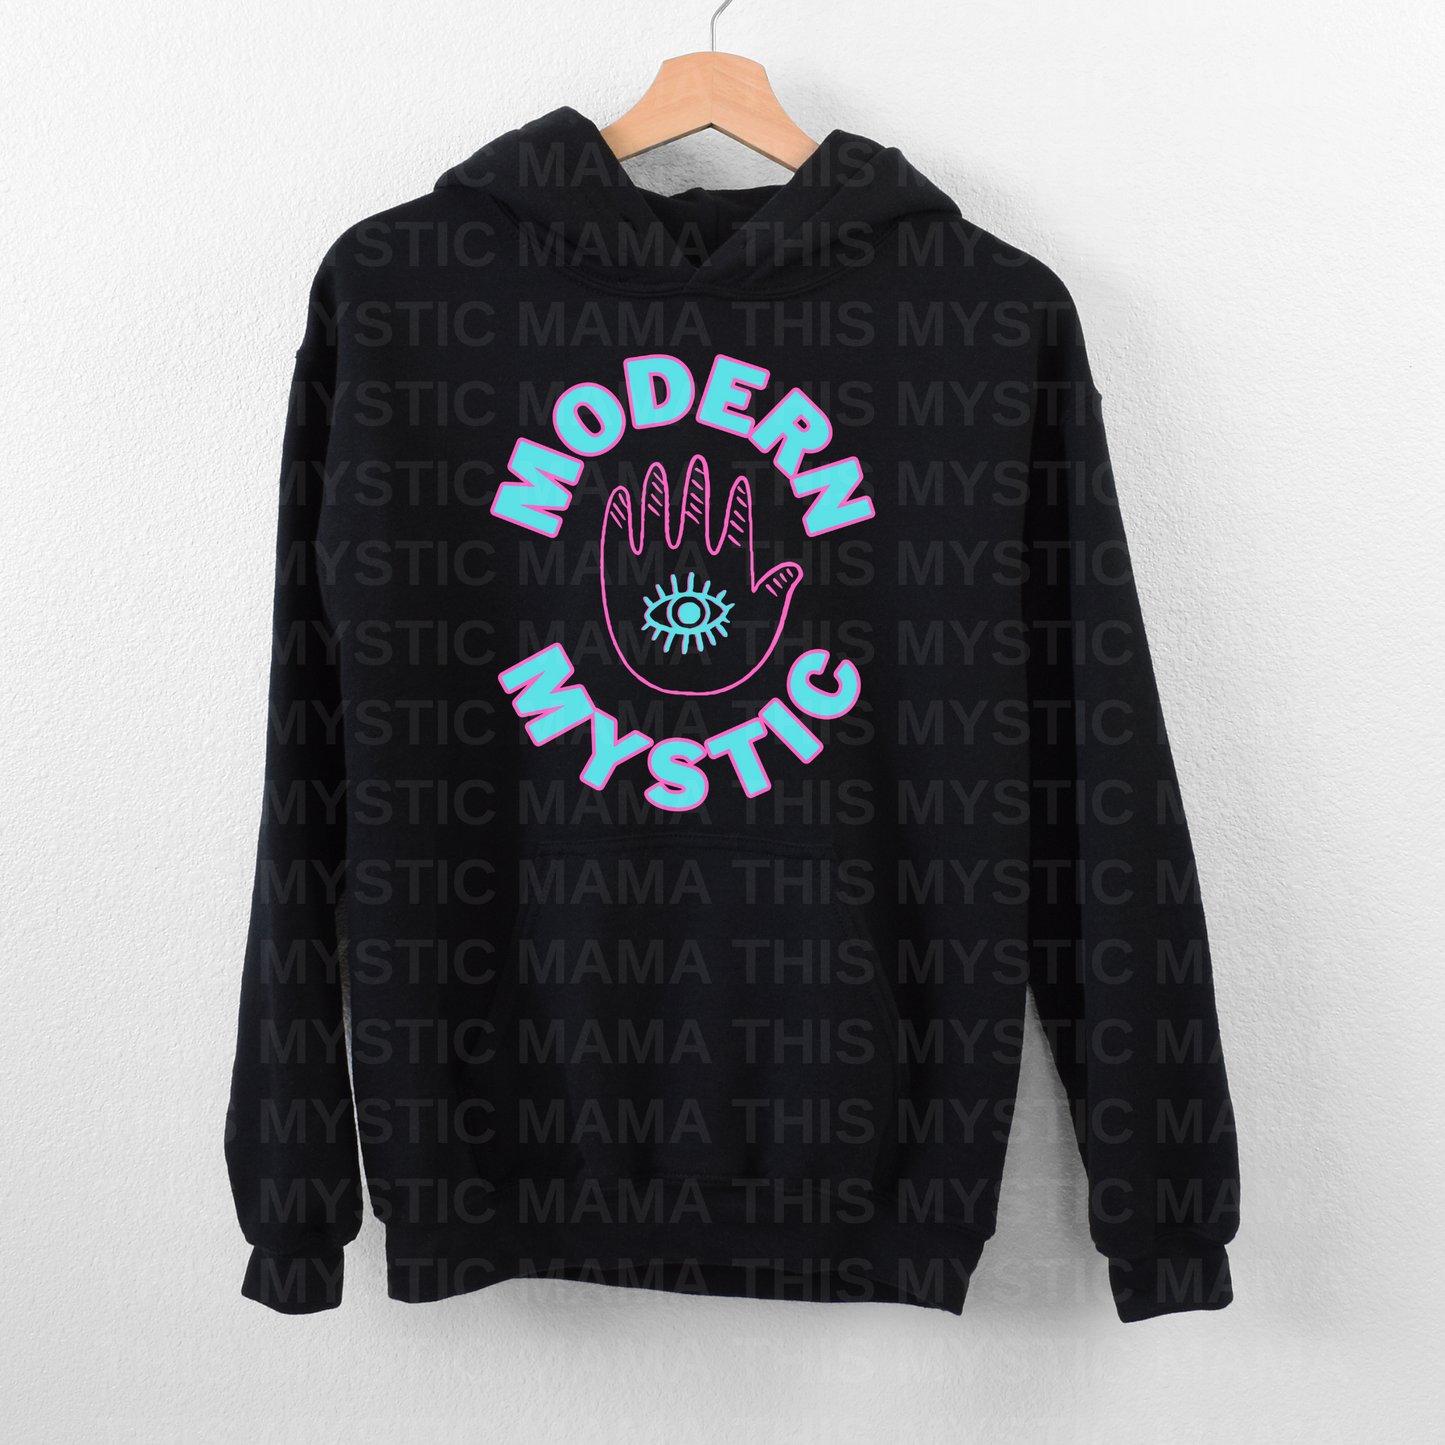 "Modern Mystic" Hoodie with Turquoise & Pink Typography